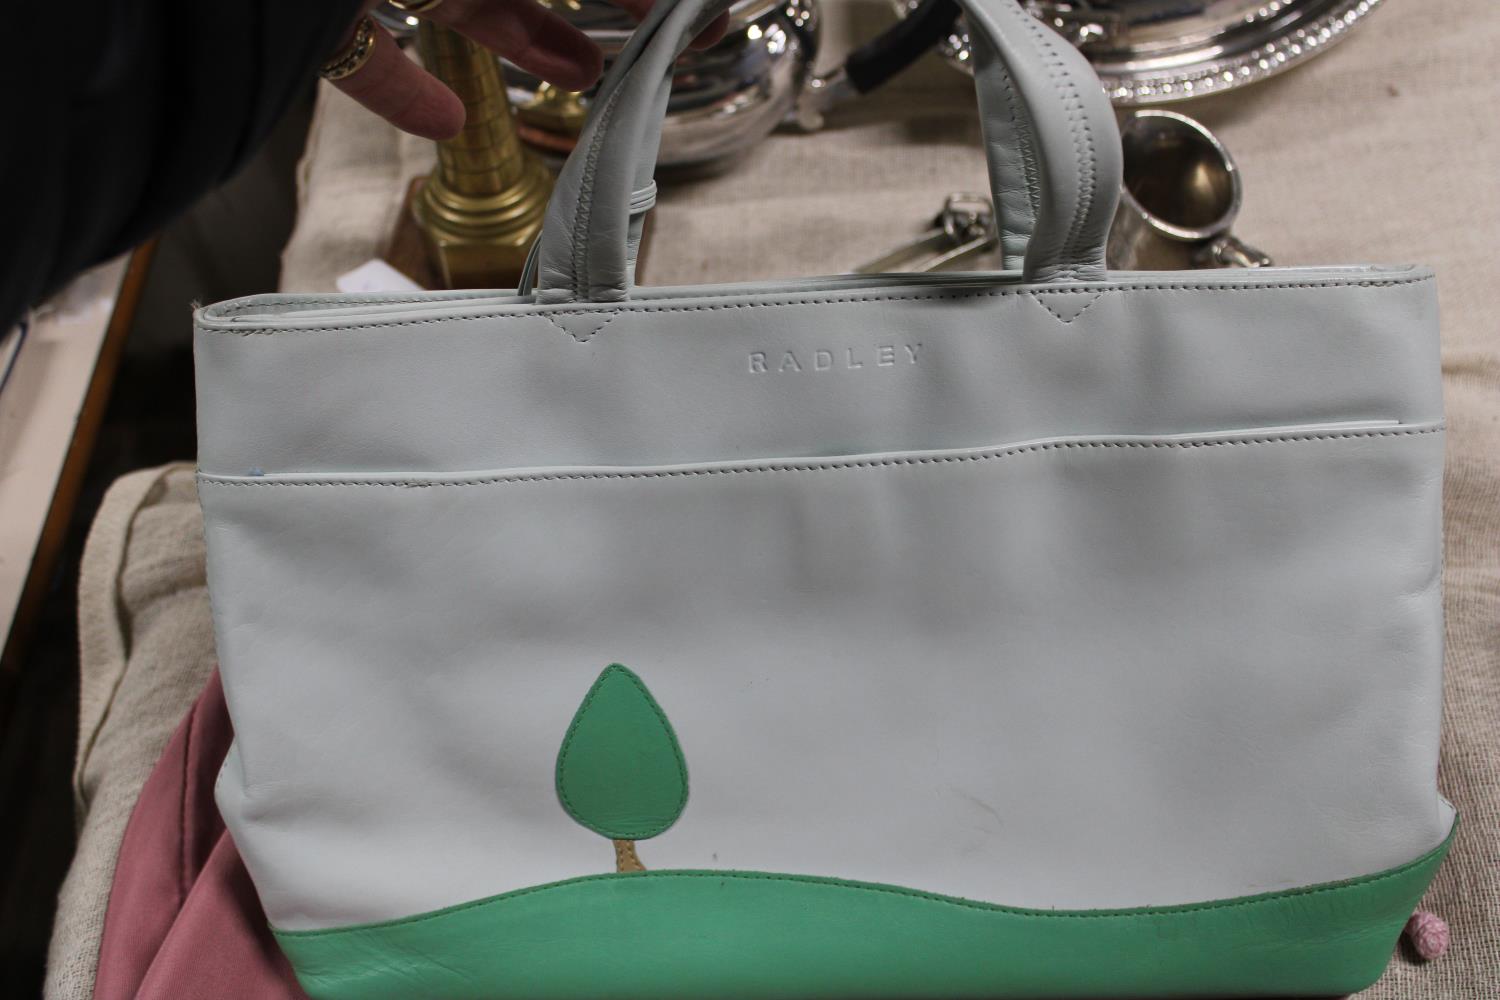 A Radley handbag with dust cover - Image 2 of 3